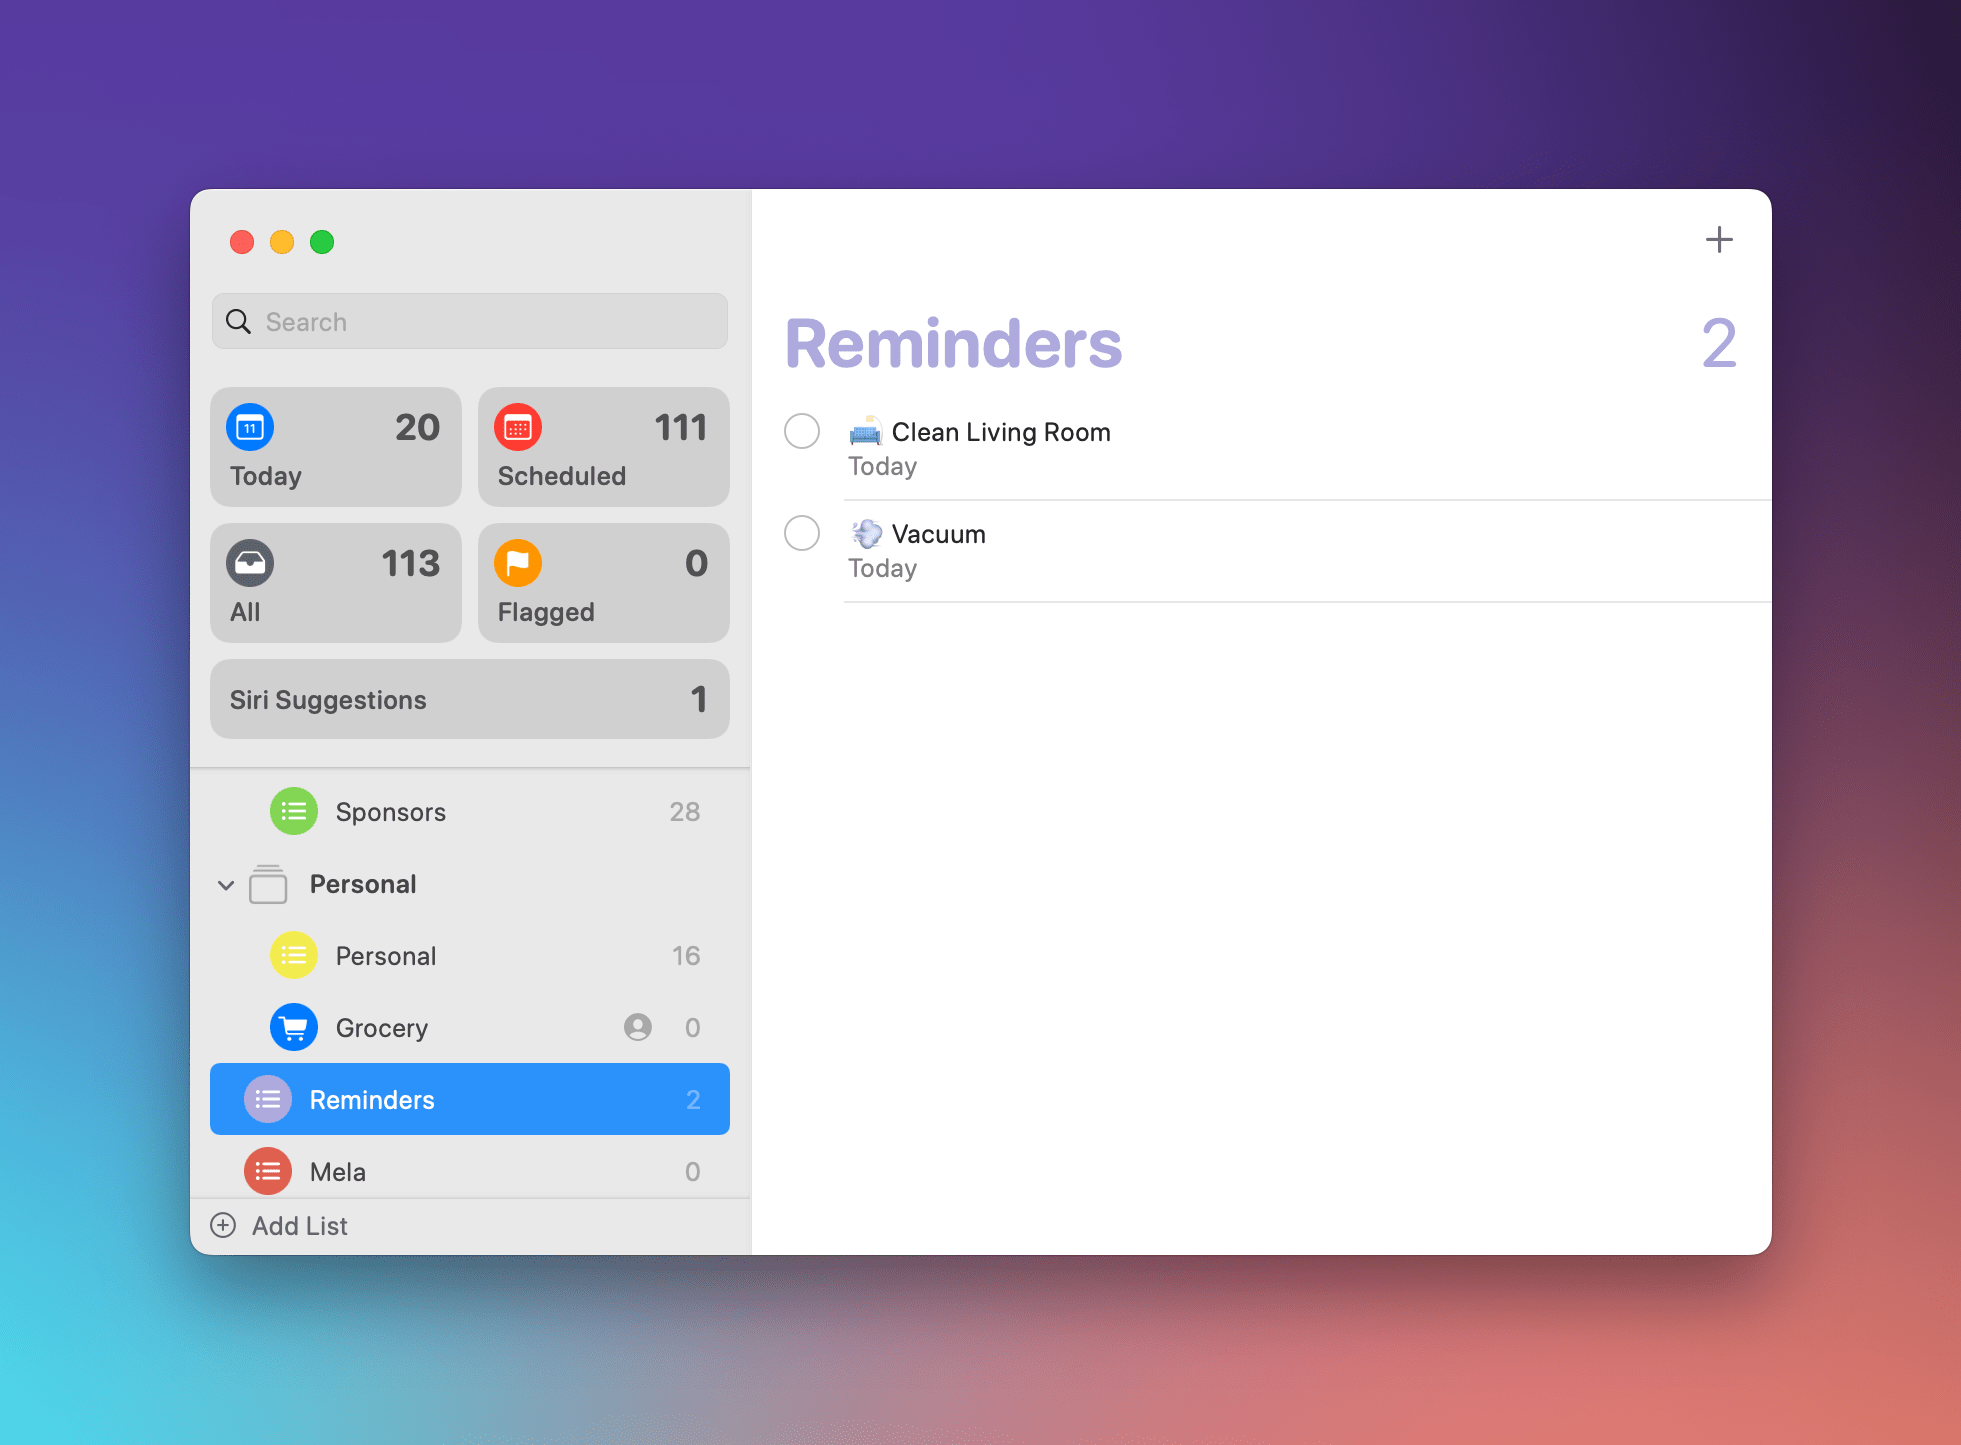 Chores can be added to Reminders.